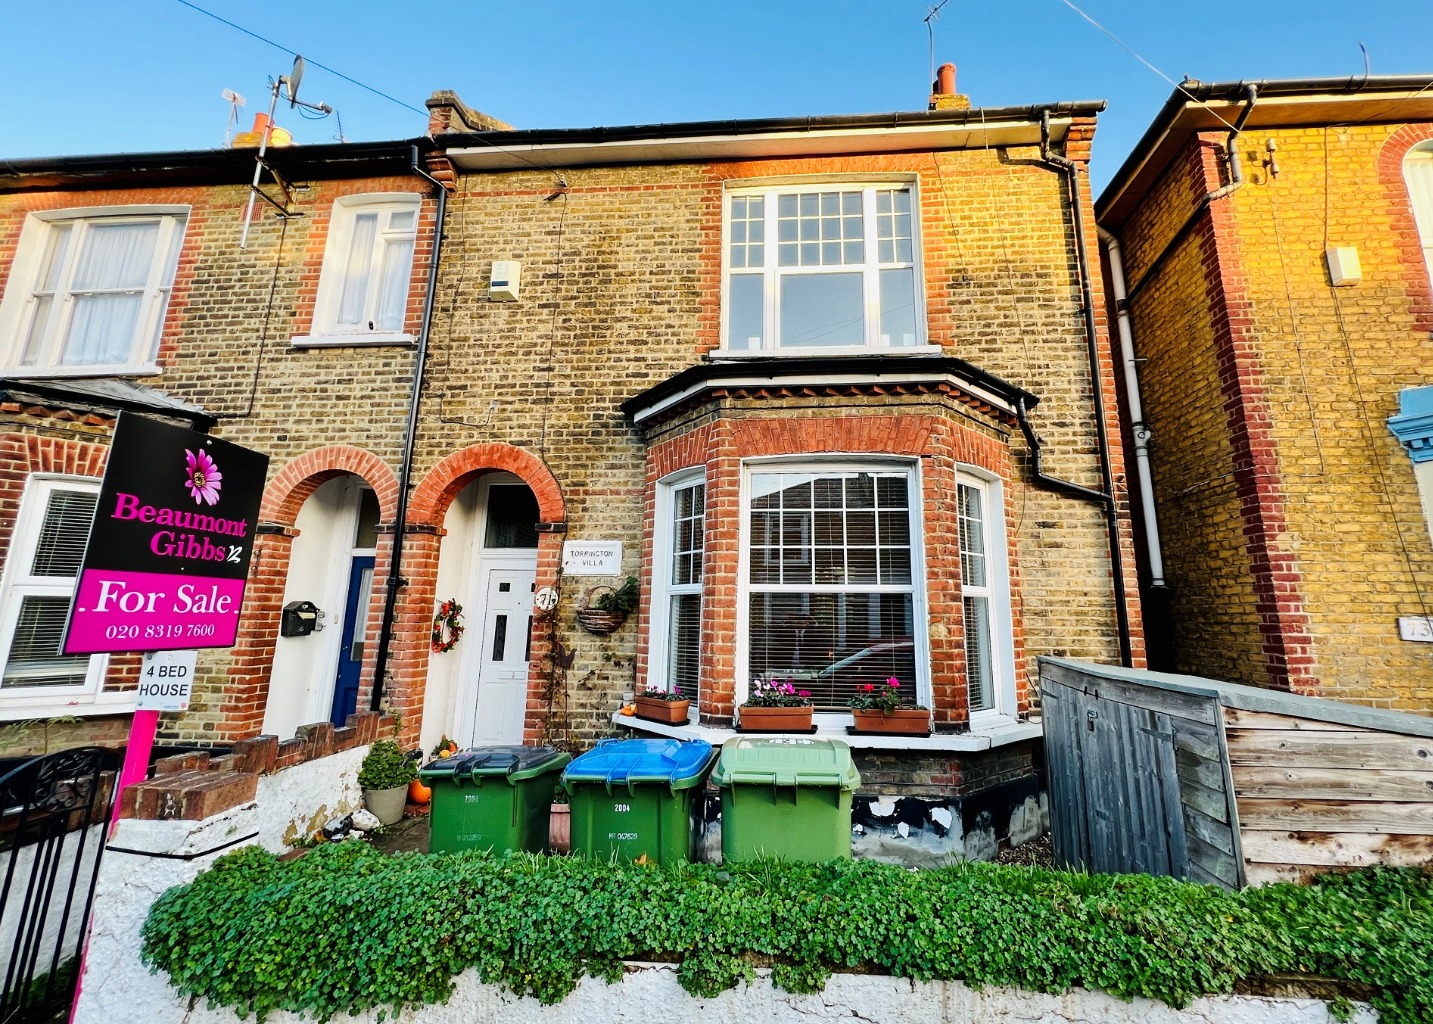 Estate Agents in Plumstead SE18. Beaumont Gibbs are pleased to offer for sale this brick and bay fronted, spacious four bedroomed two bathroomed family home for sale.